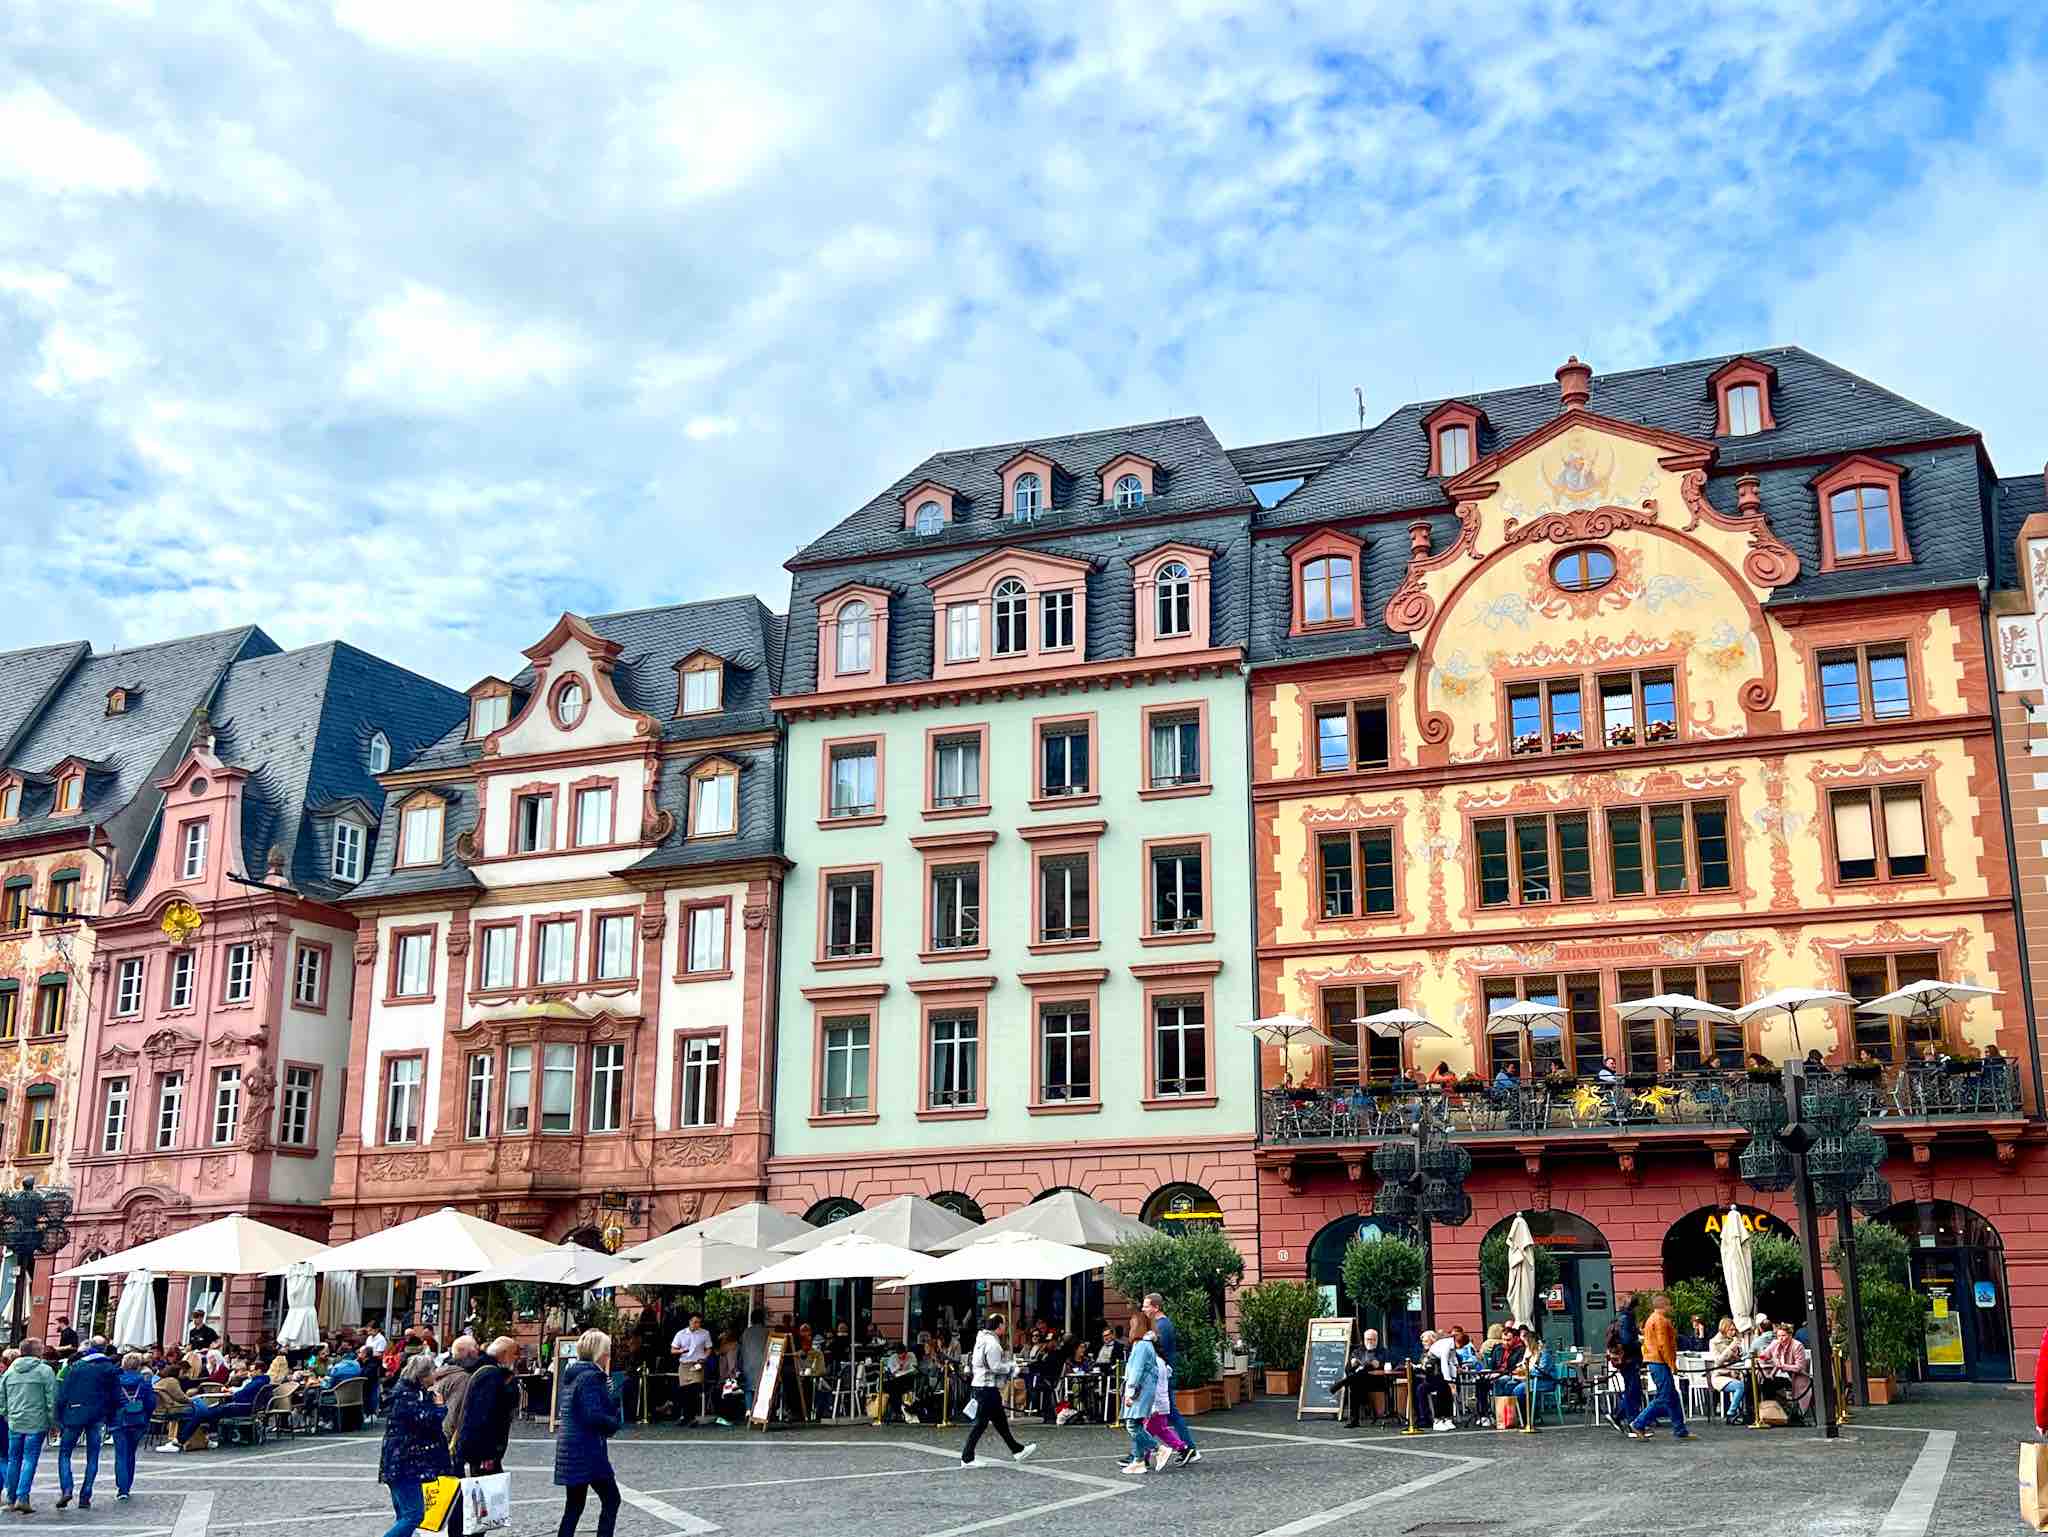 A row of buildings in Mainz Germany.